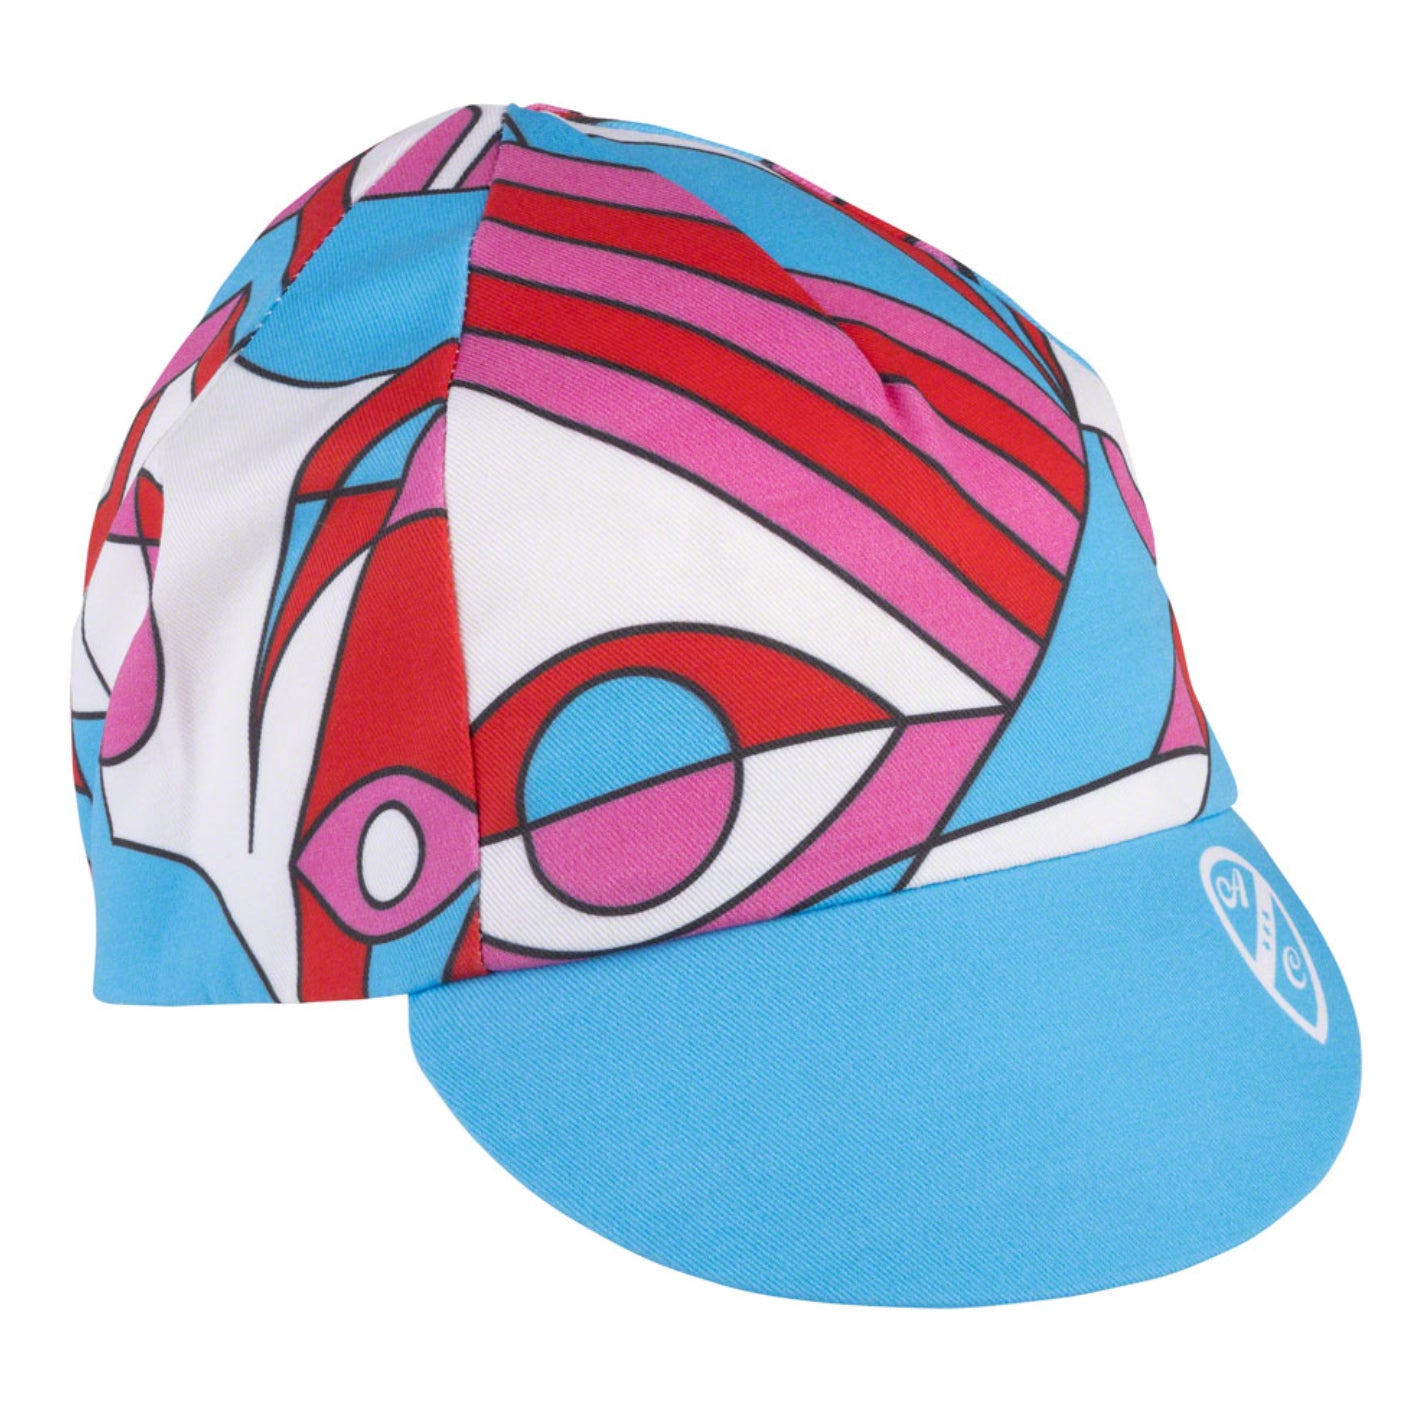 All-City Parthenon Party Cycling Cap - Pink, Red, Blue, Black, One Size